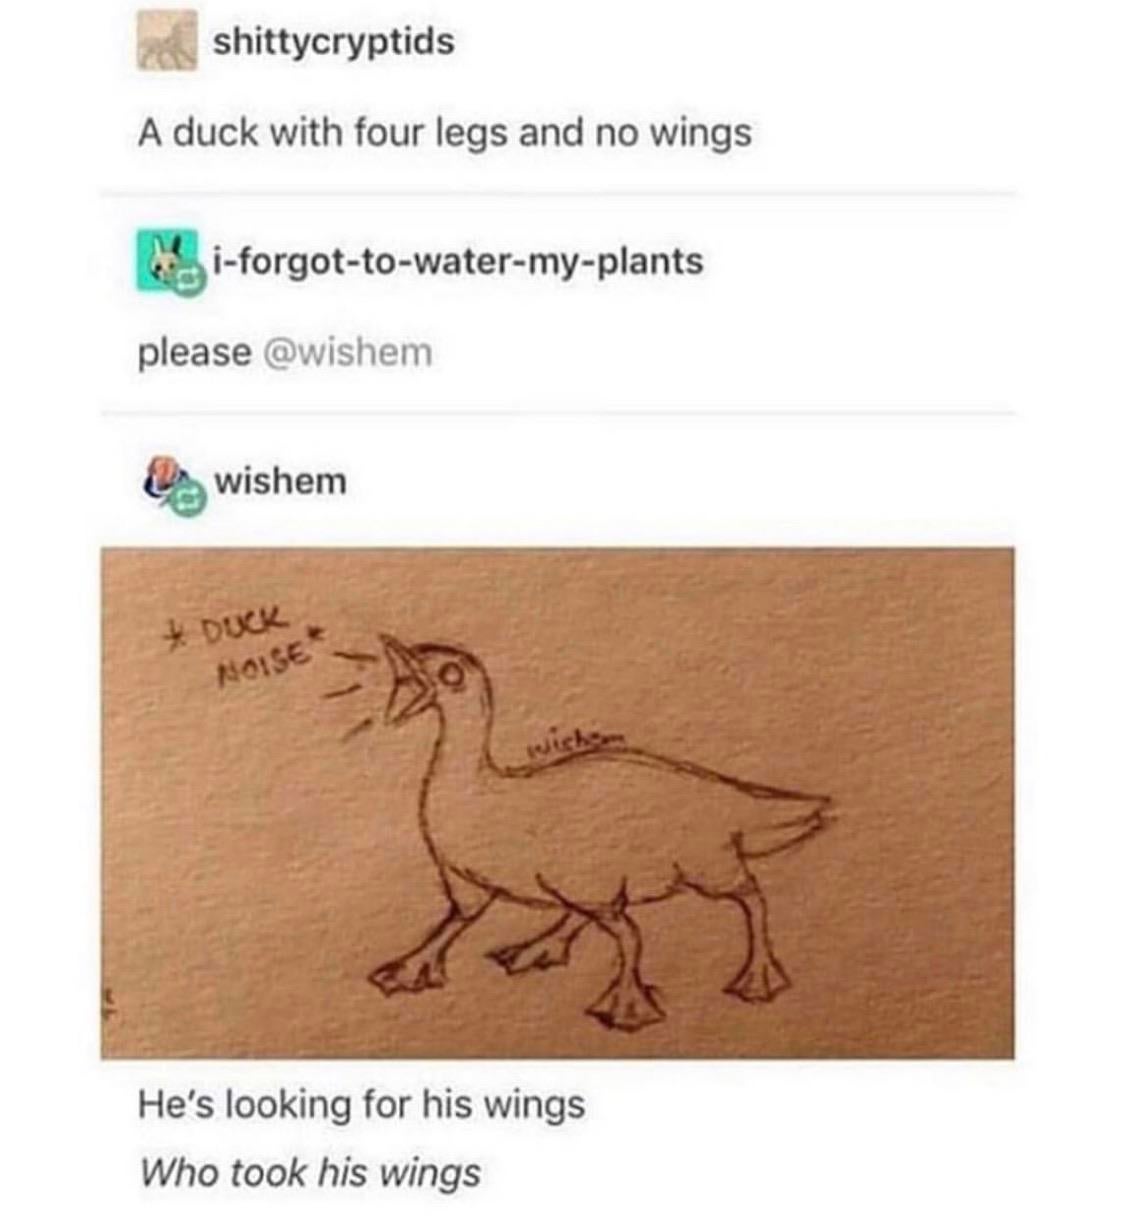 duck with four legs - shittycryptids A duck with four legs and no wings iforgottowatermyplants please A wishem Duck Noise He's looking for his wings Who took his wings